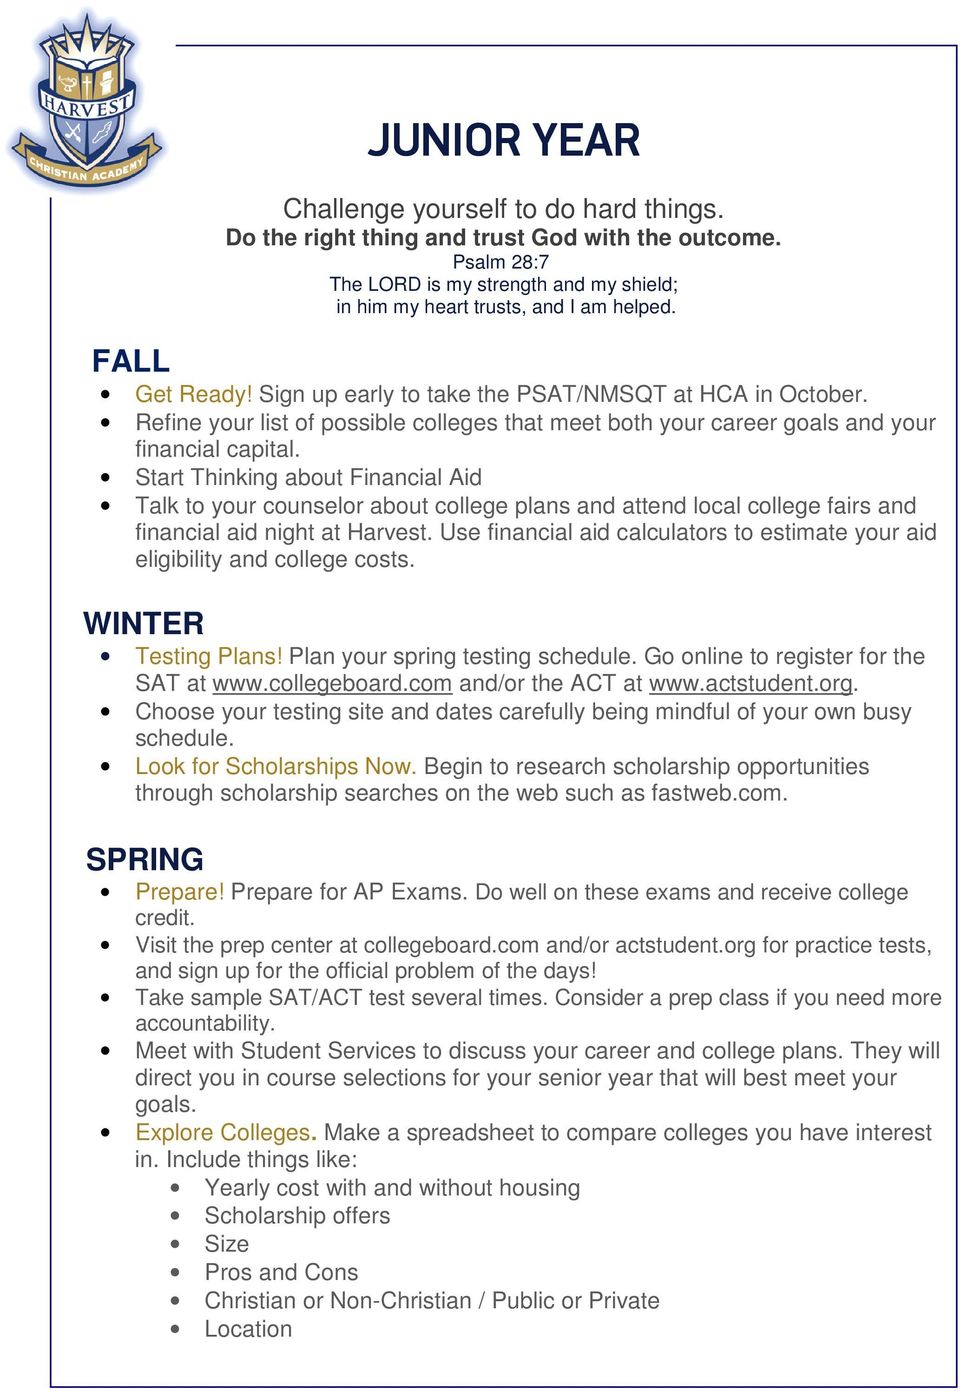 Start Thinking about Financial Aid Talk to your counselor about college plans and attend local college fairs and financial aid night at Harvest.